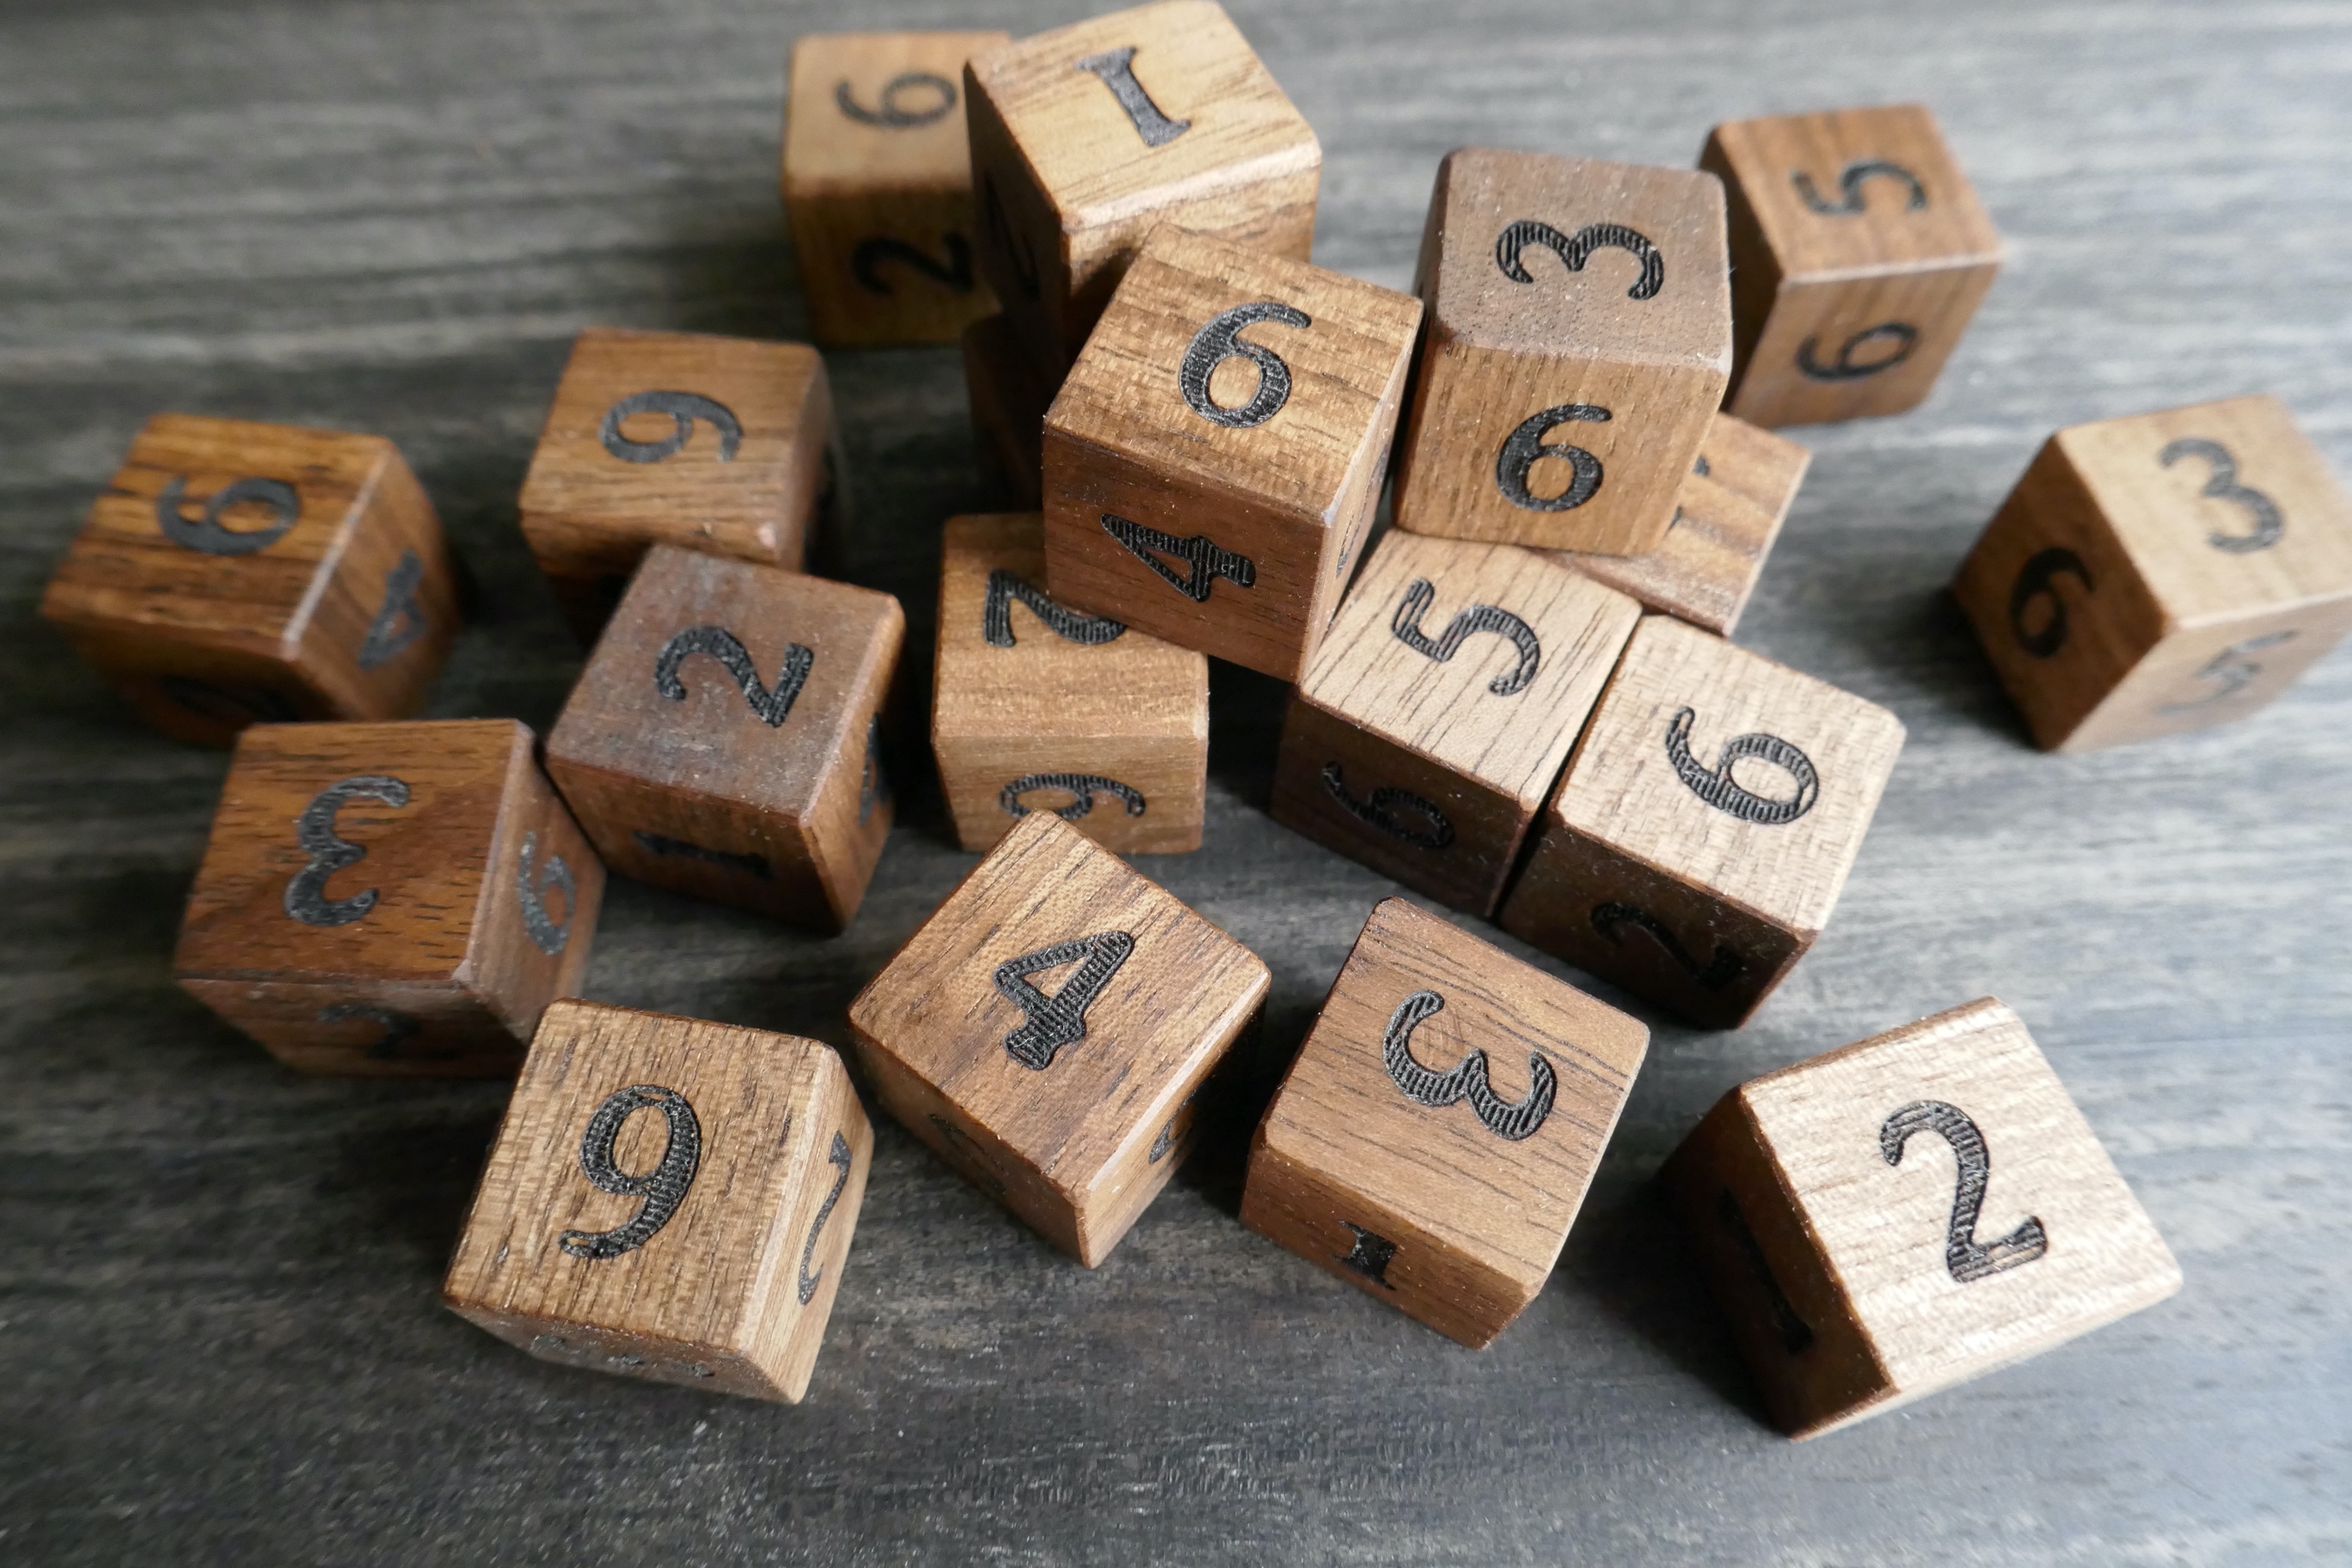 A pile of wooden dice